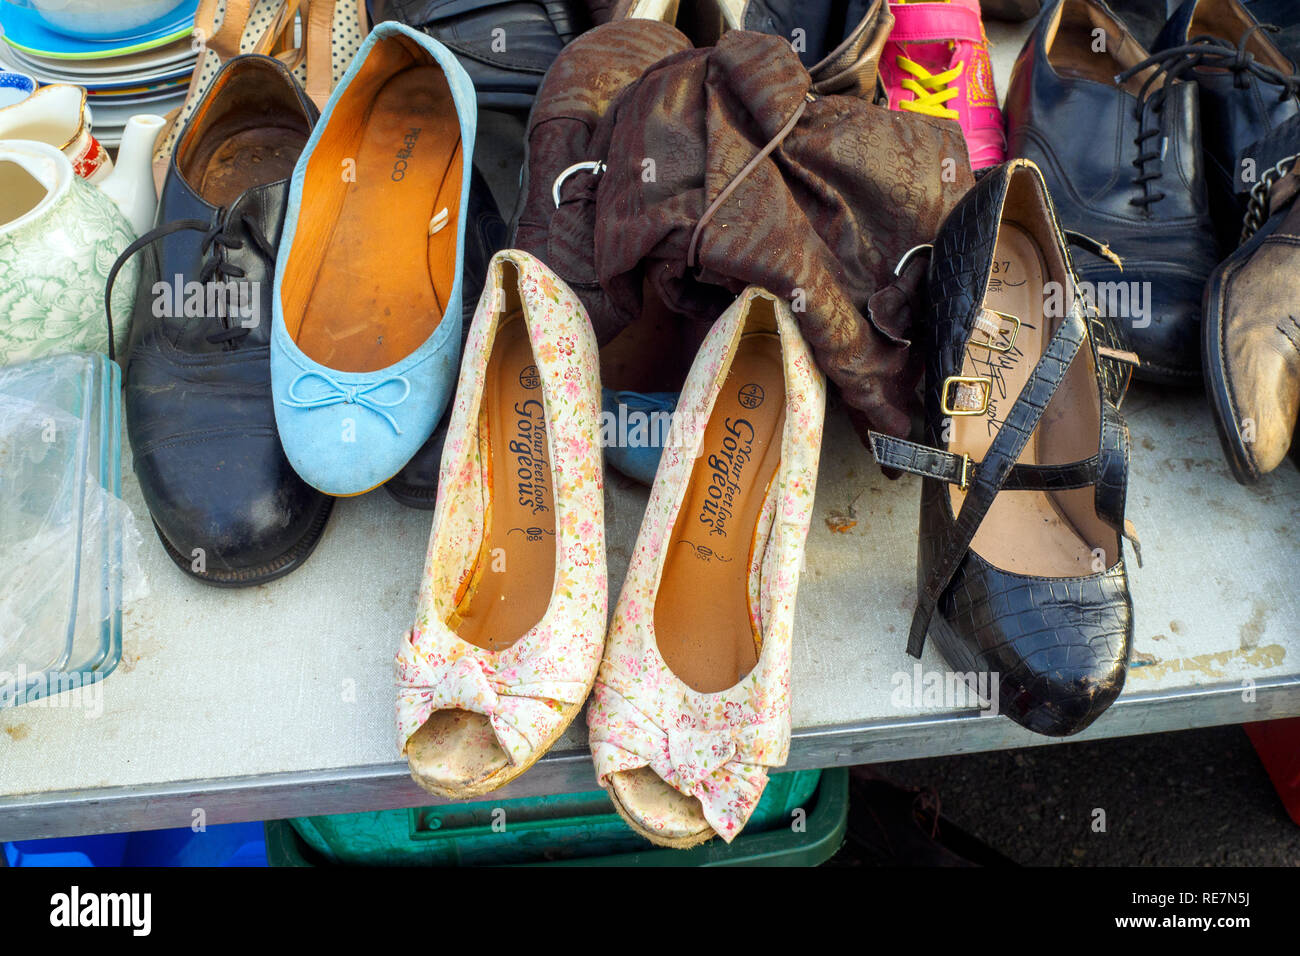 Second Hand Shoes High Resolution Stock Photography and Images - Alamy